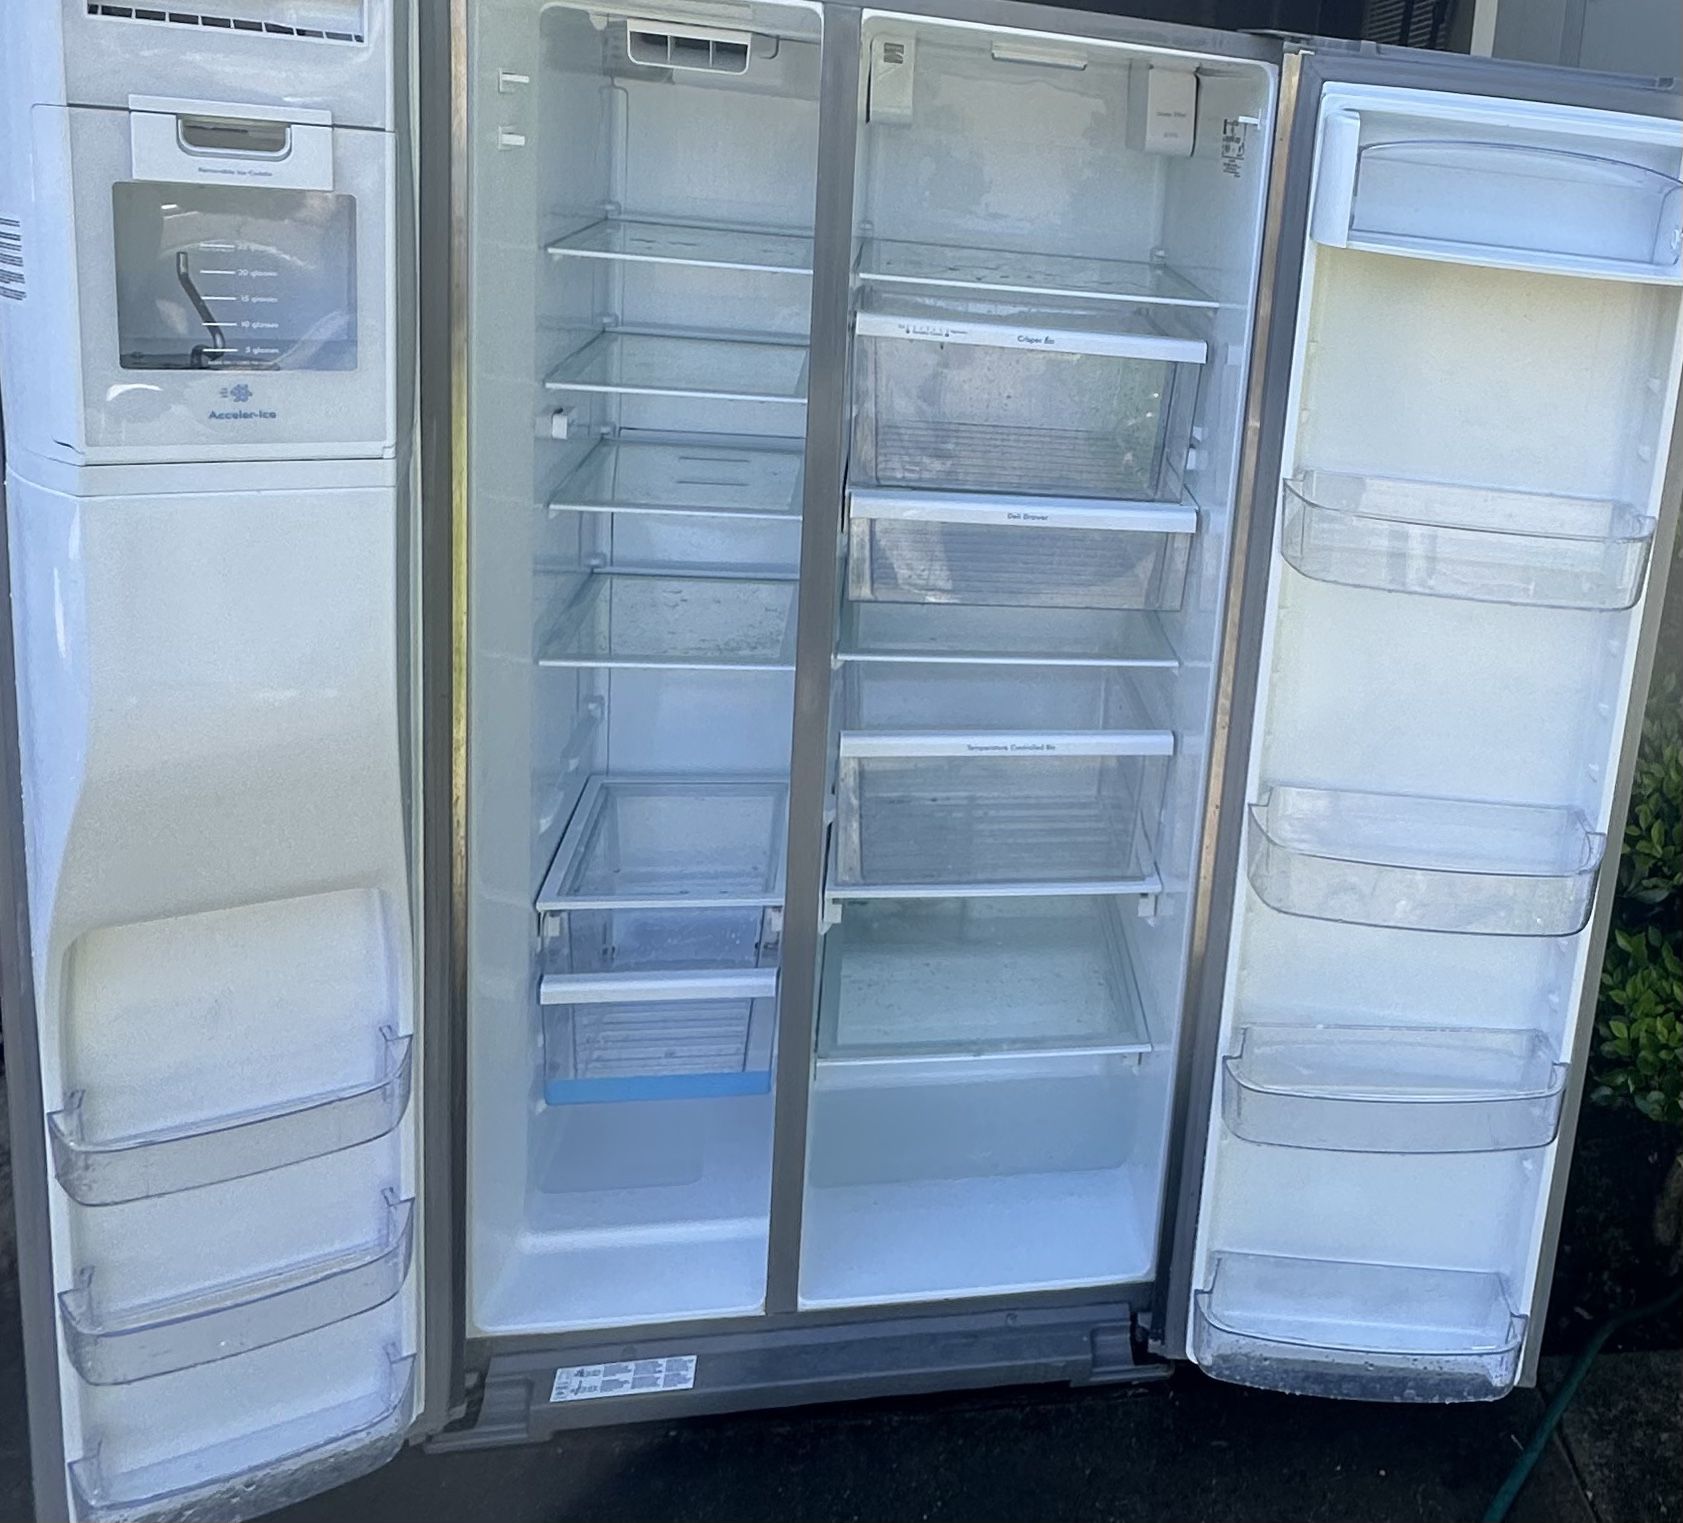 Kenmore Refrigerator  Pick Up Only